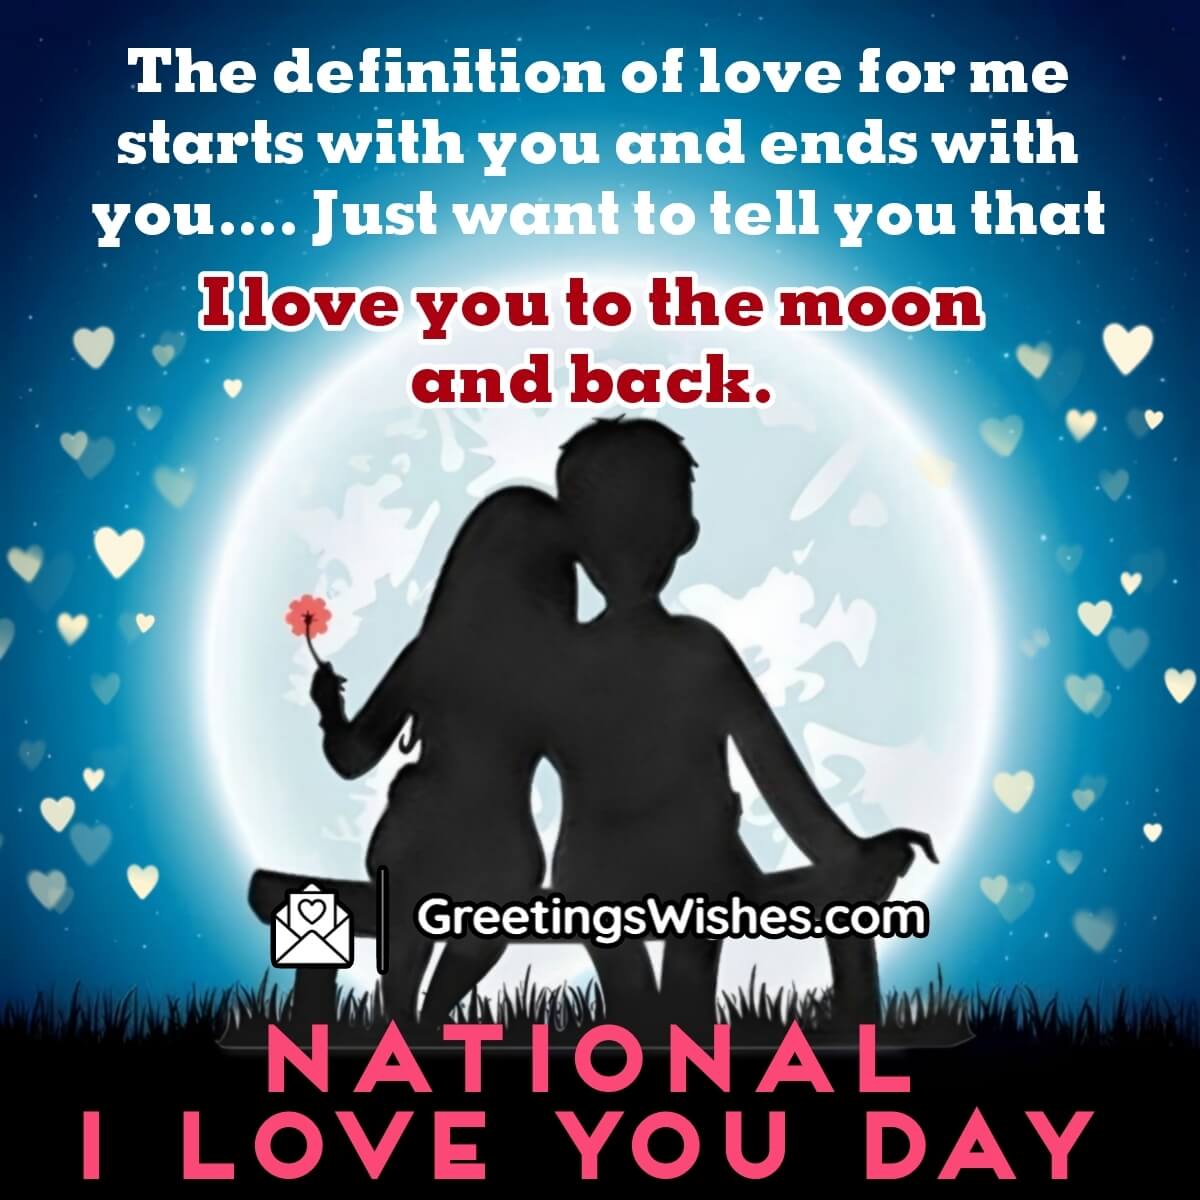 National I Love You Day Message For Him